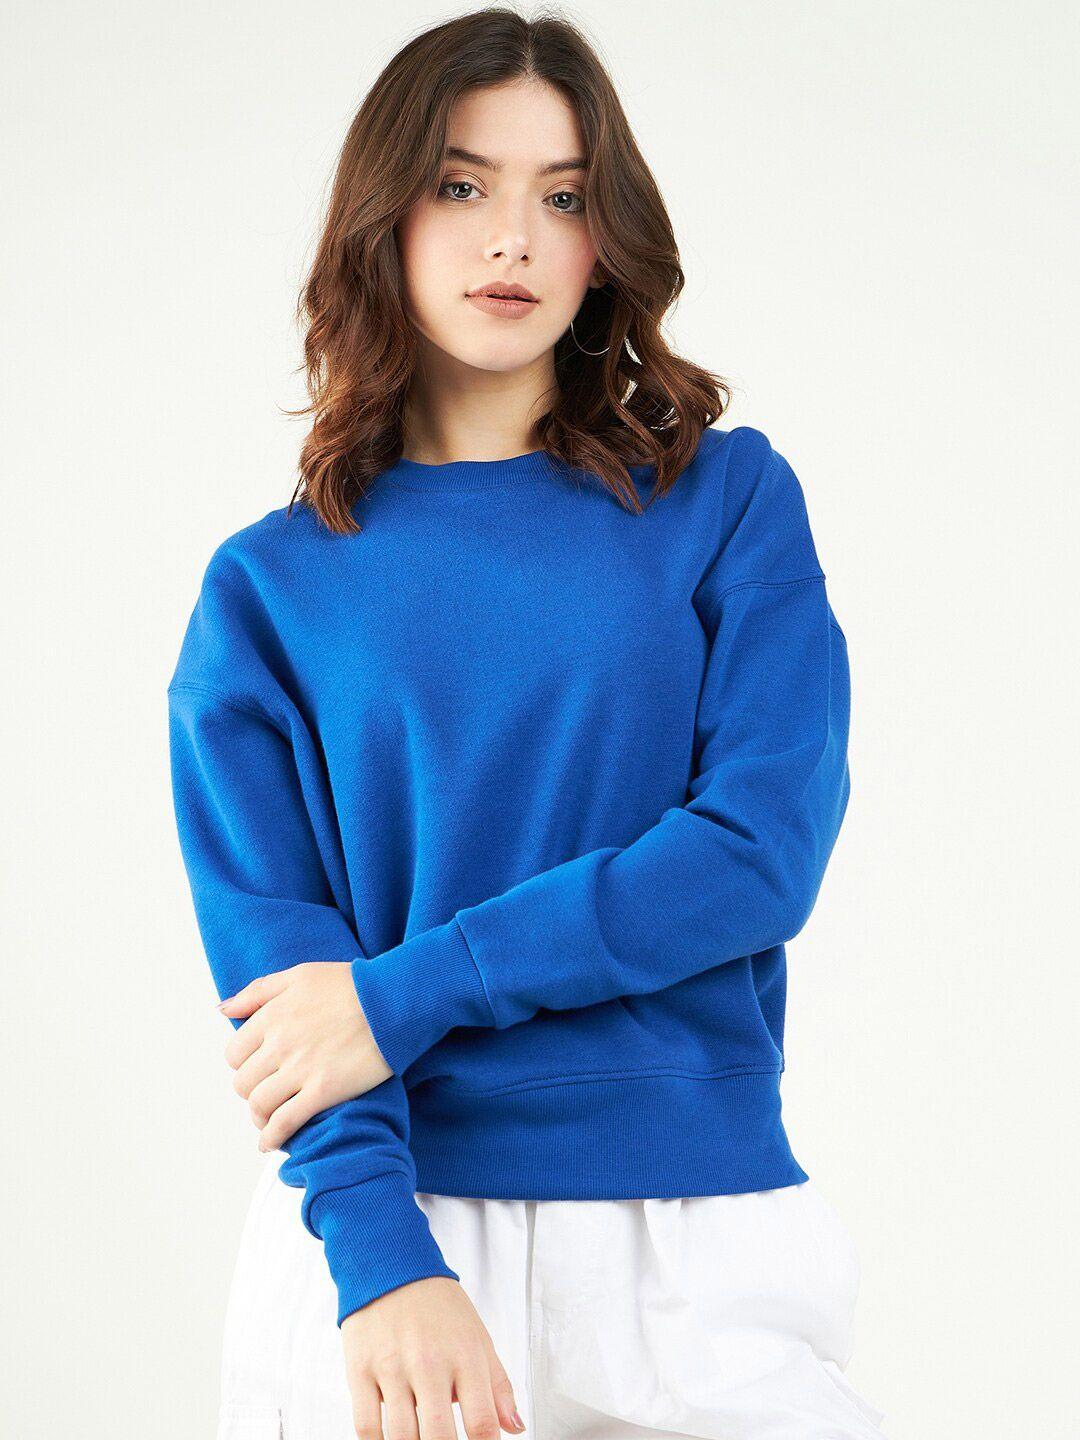 Strong And Brave Round Neck Cotton Sweatshirt